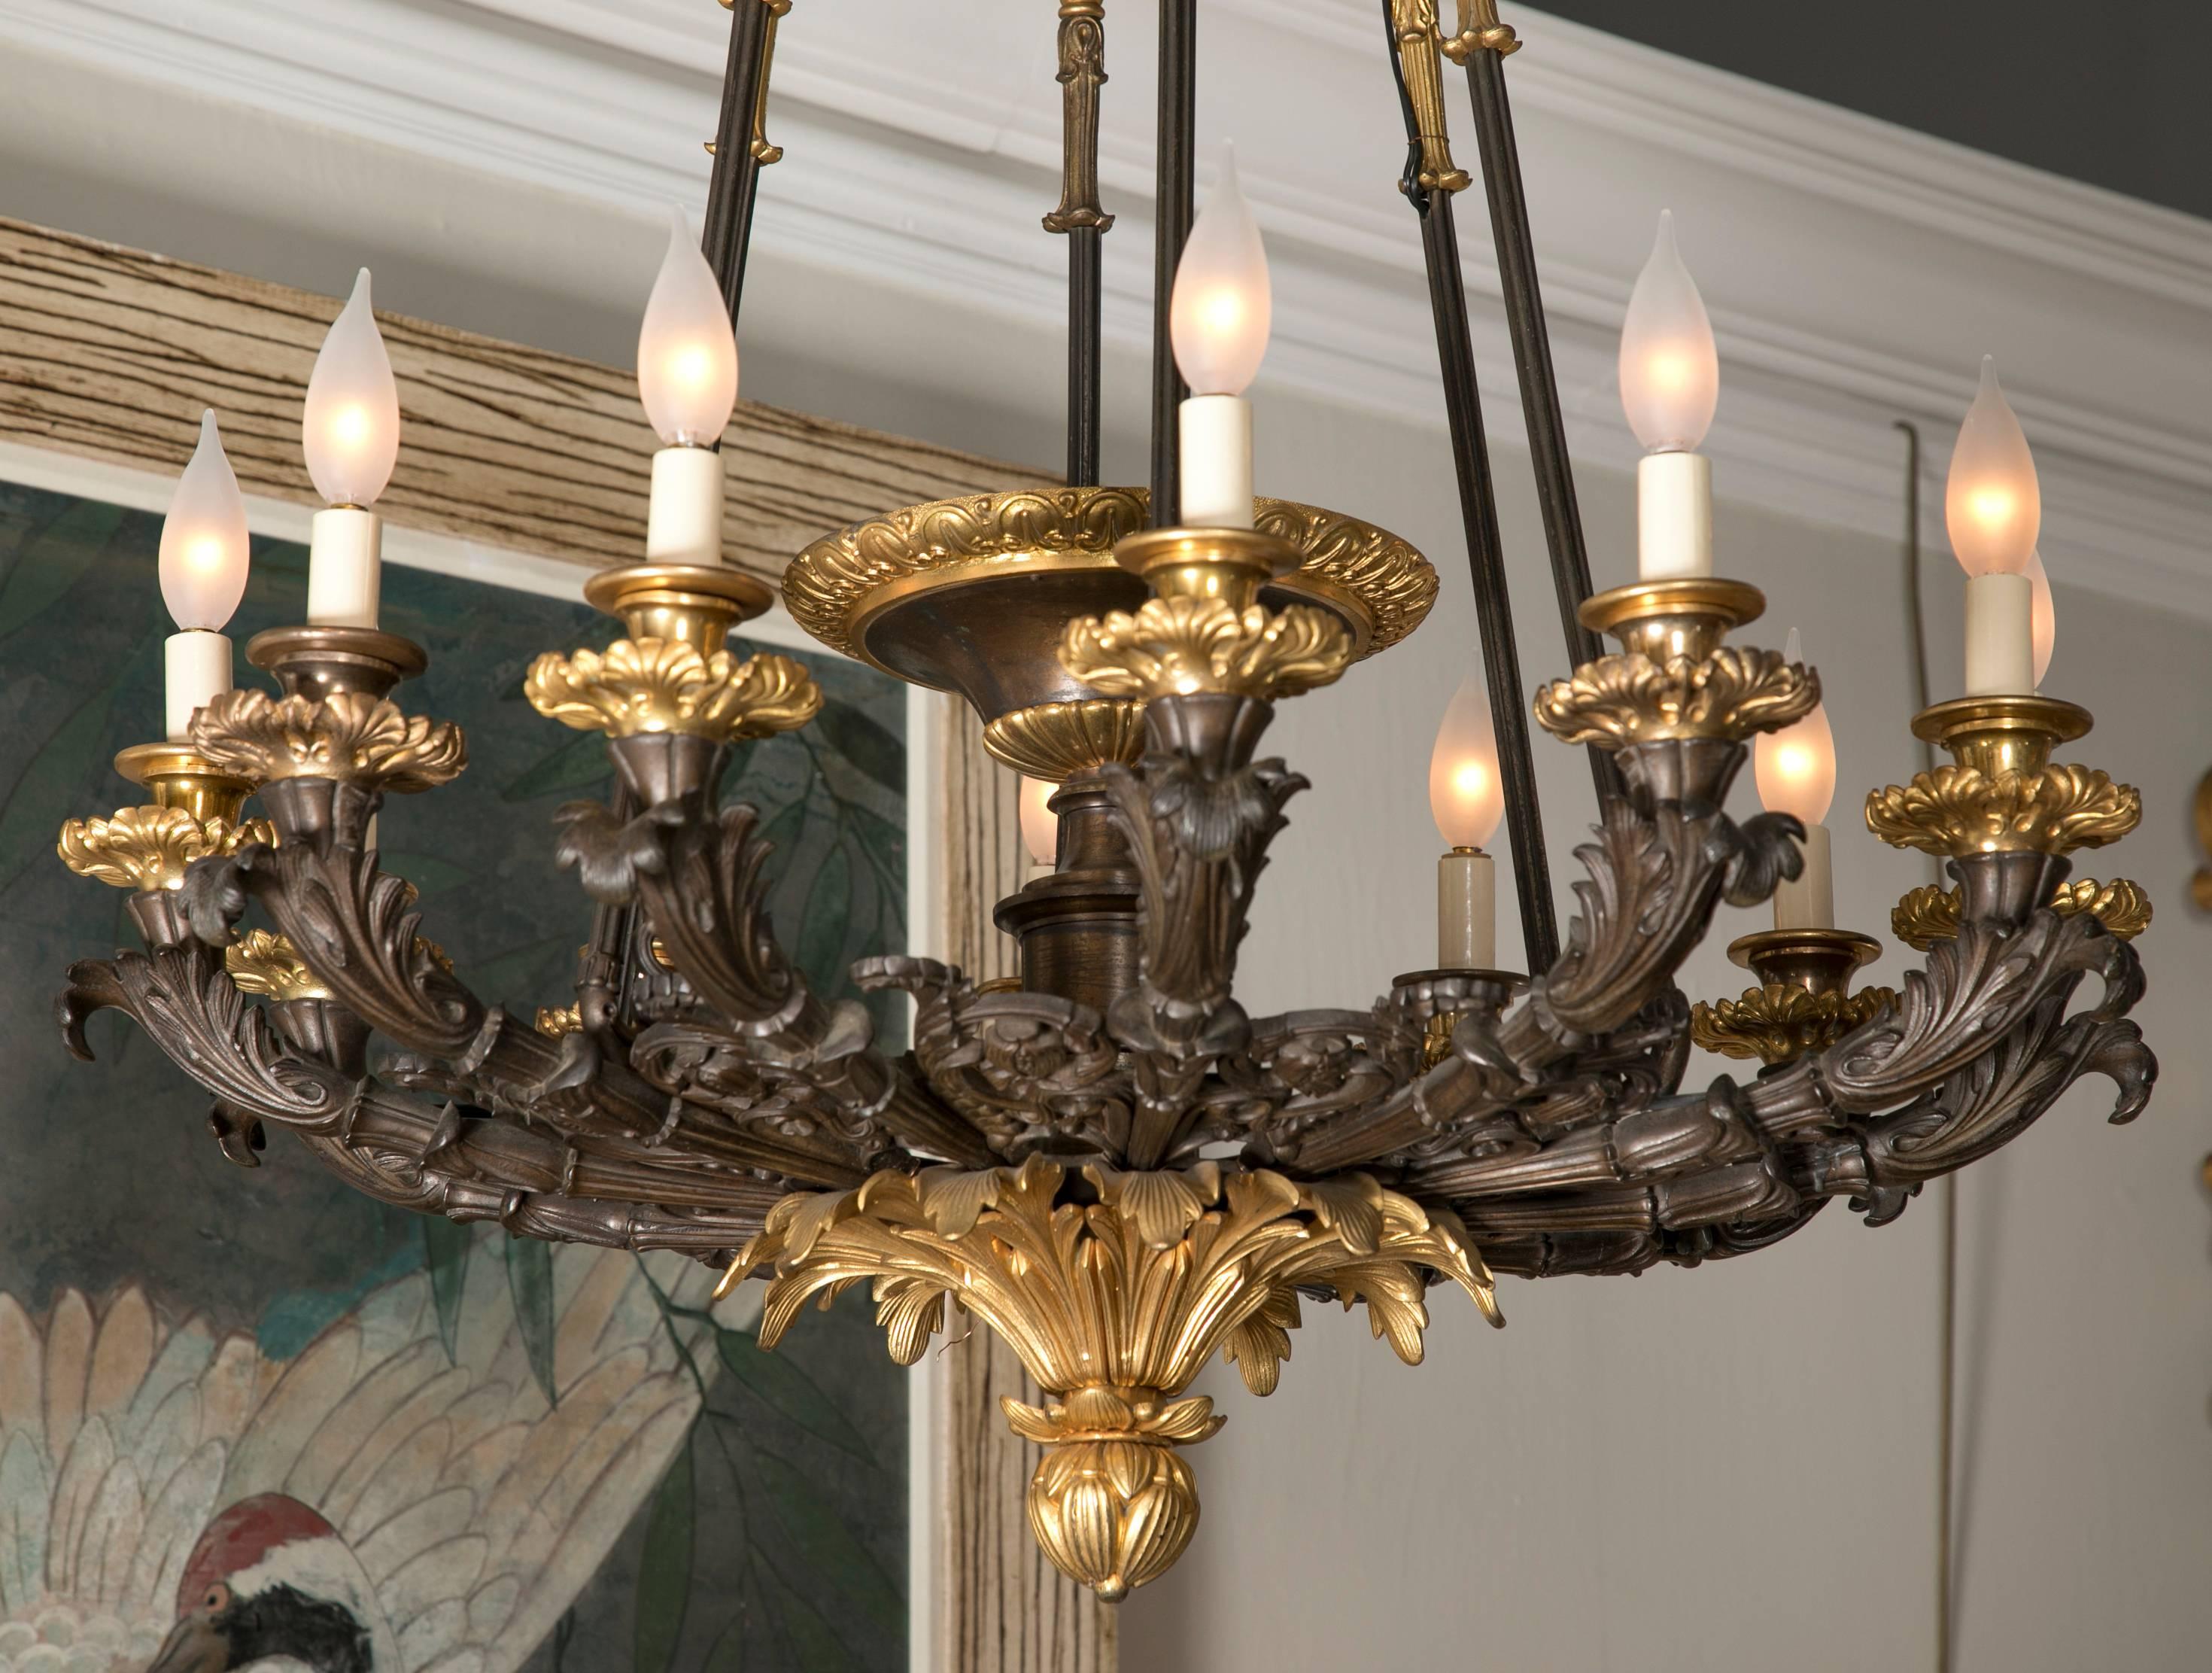 Palatial gilt & patinated bronze Napoleonic 12 light chandelier.  Provenance : Andrew Hall estate, Southport, CT.